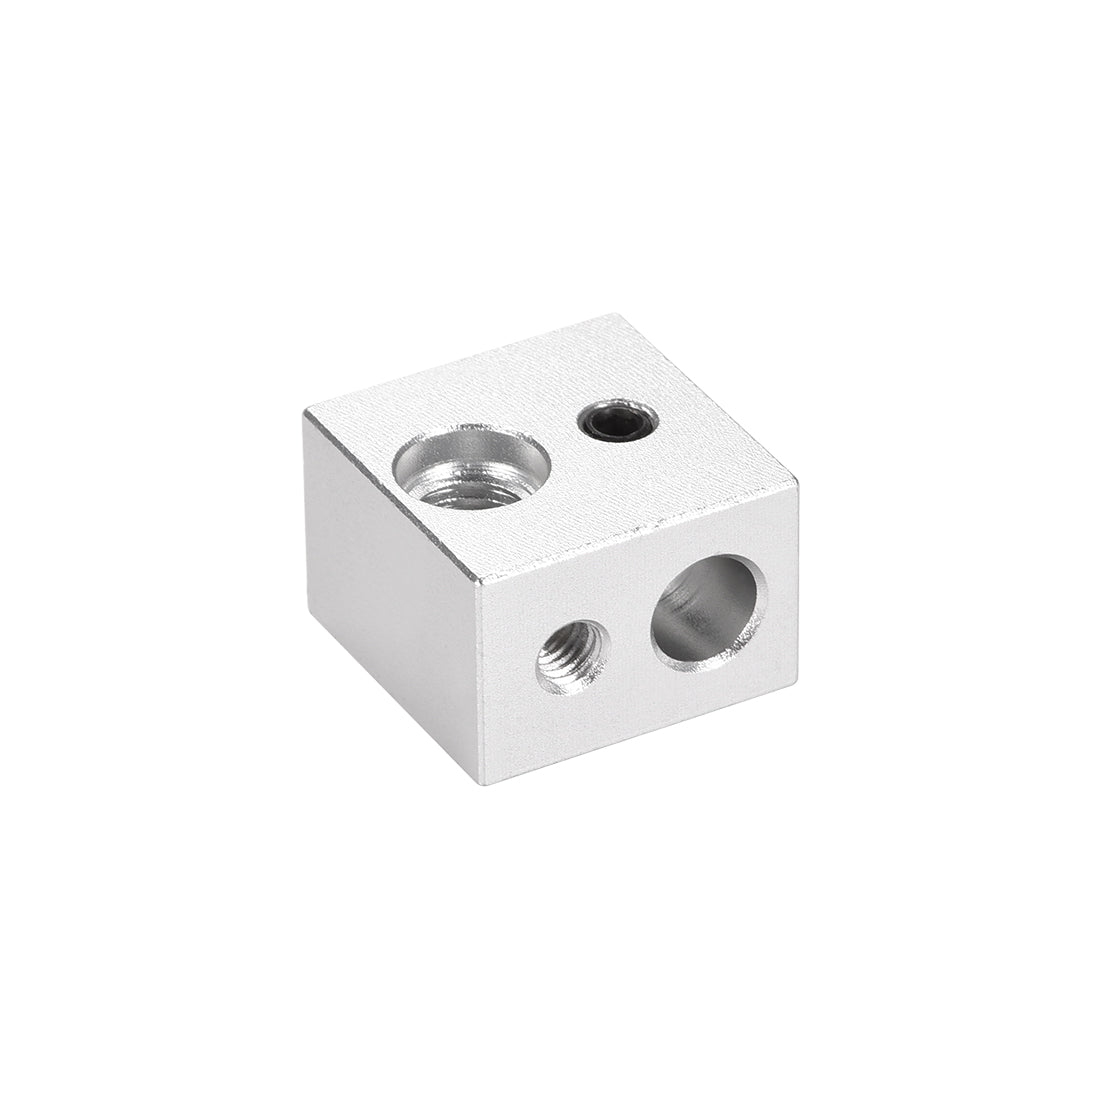 uxcell Uxcell Aluminum Heater Block, Specialized for MK10 M7 1.75mm Filament 2pcs